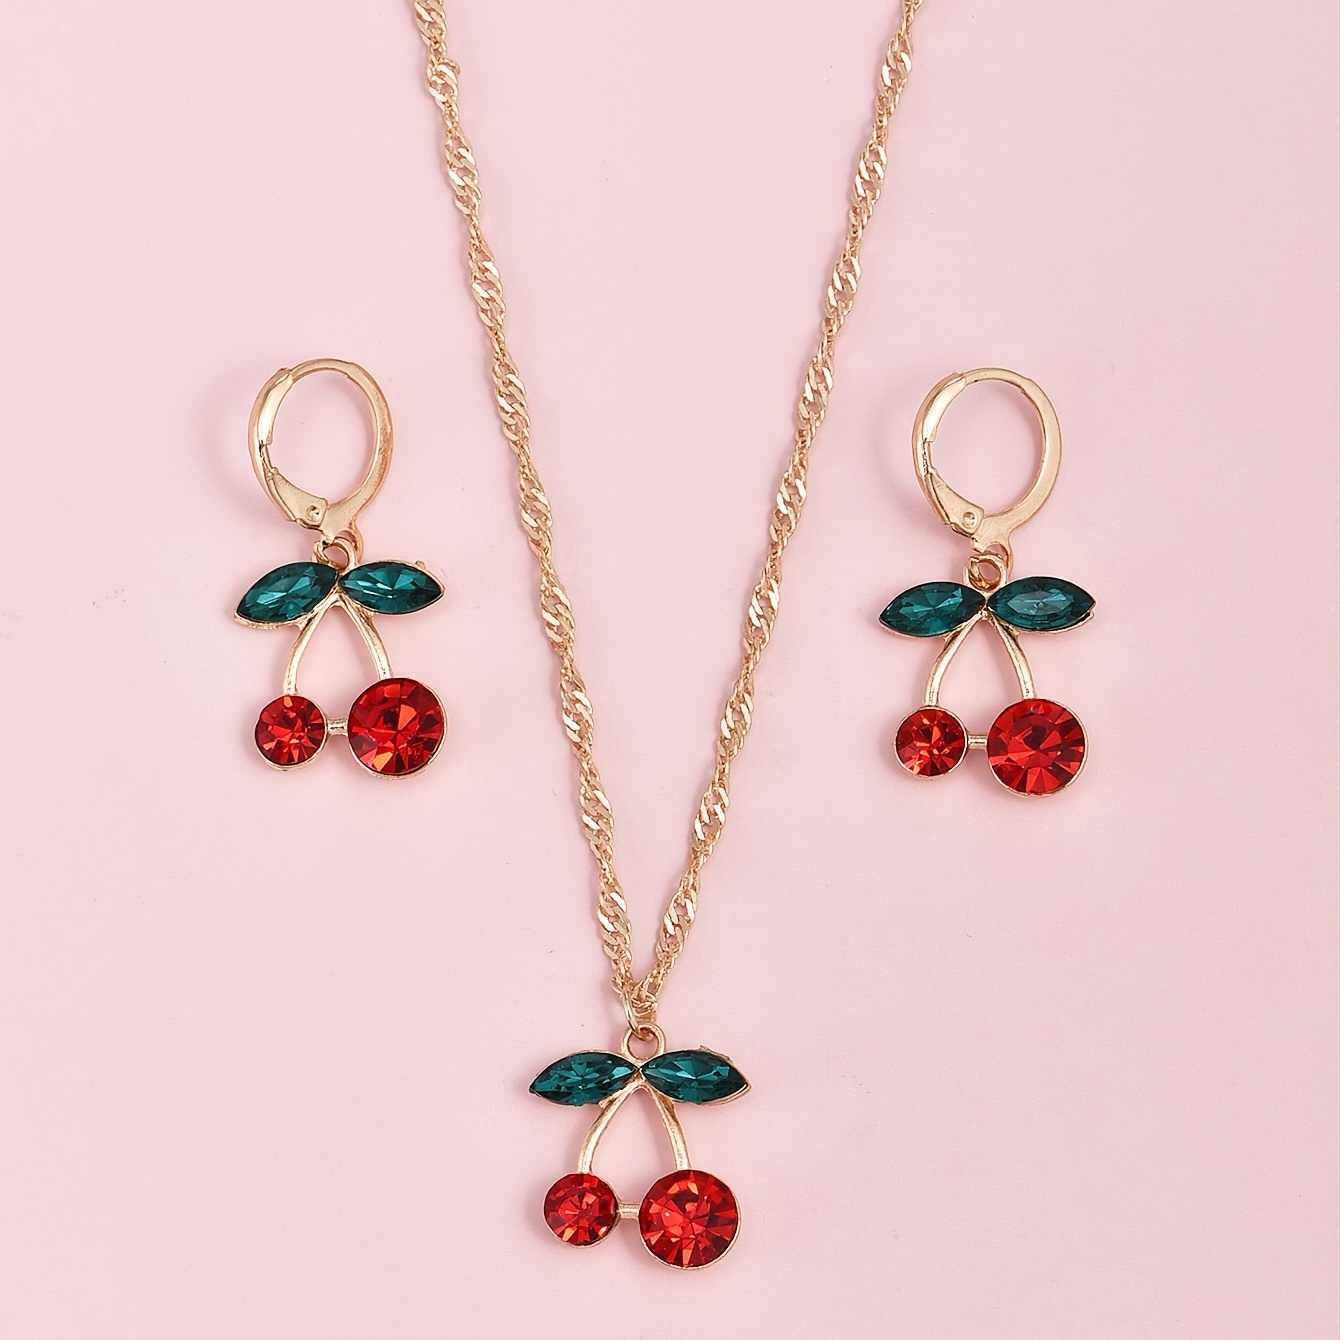 

Sweet Cherry Crystal Pendant Necklace & Earrings Set Exquisite Fruit Golden Chain Jewelry Set Gift